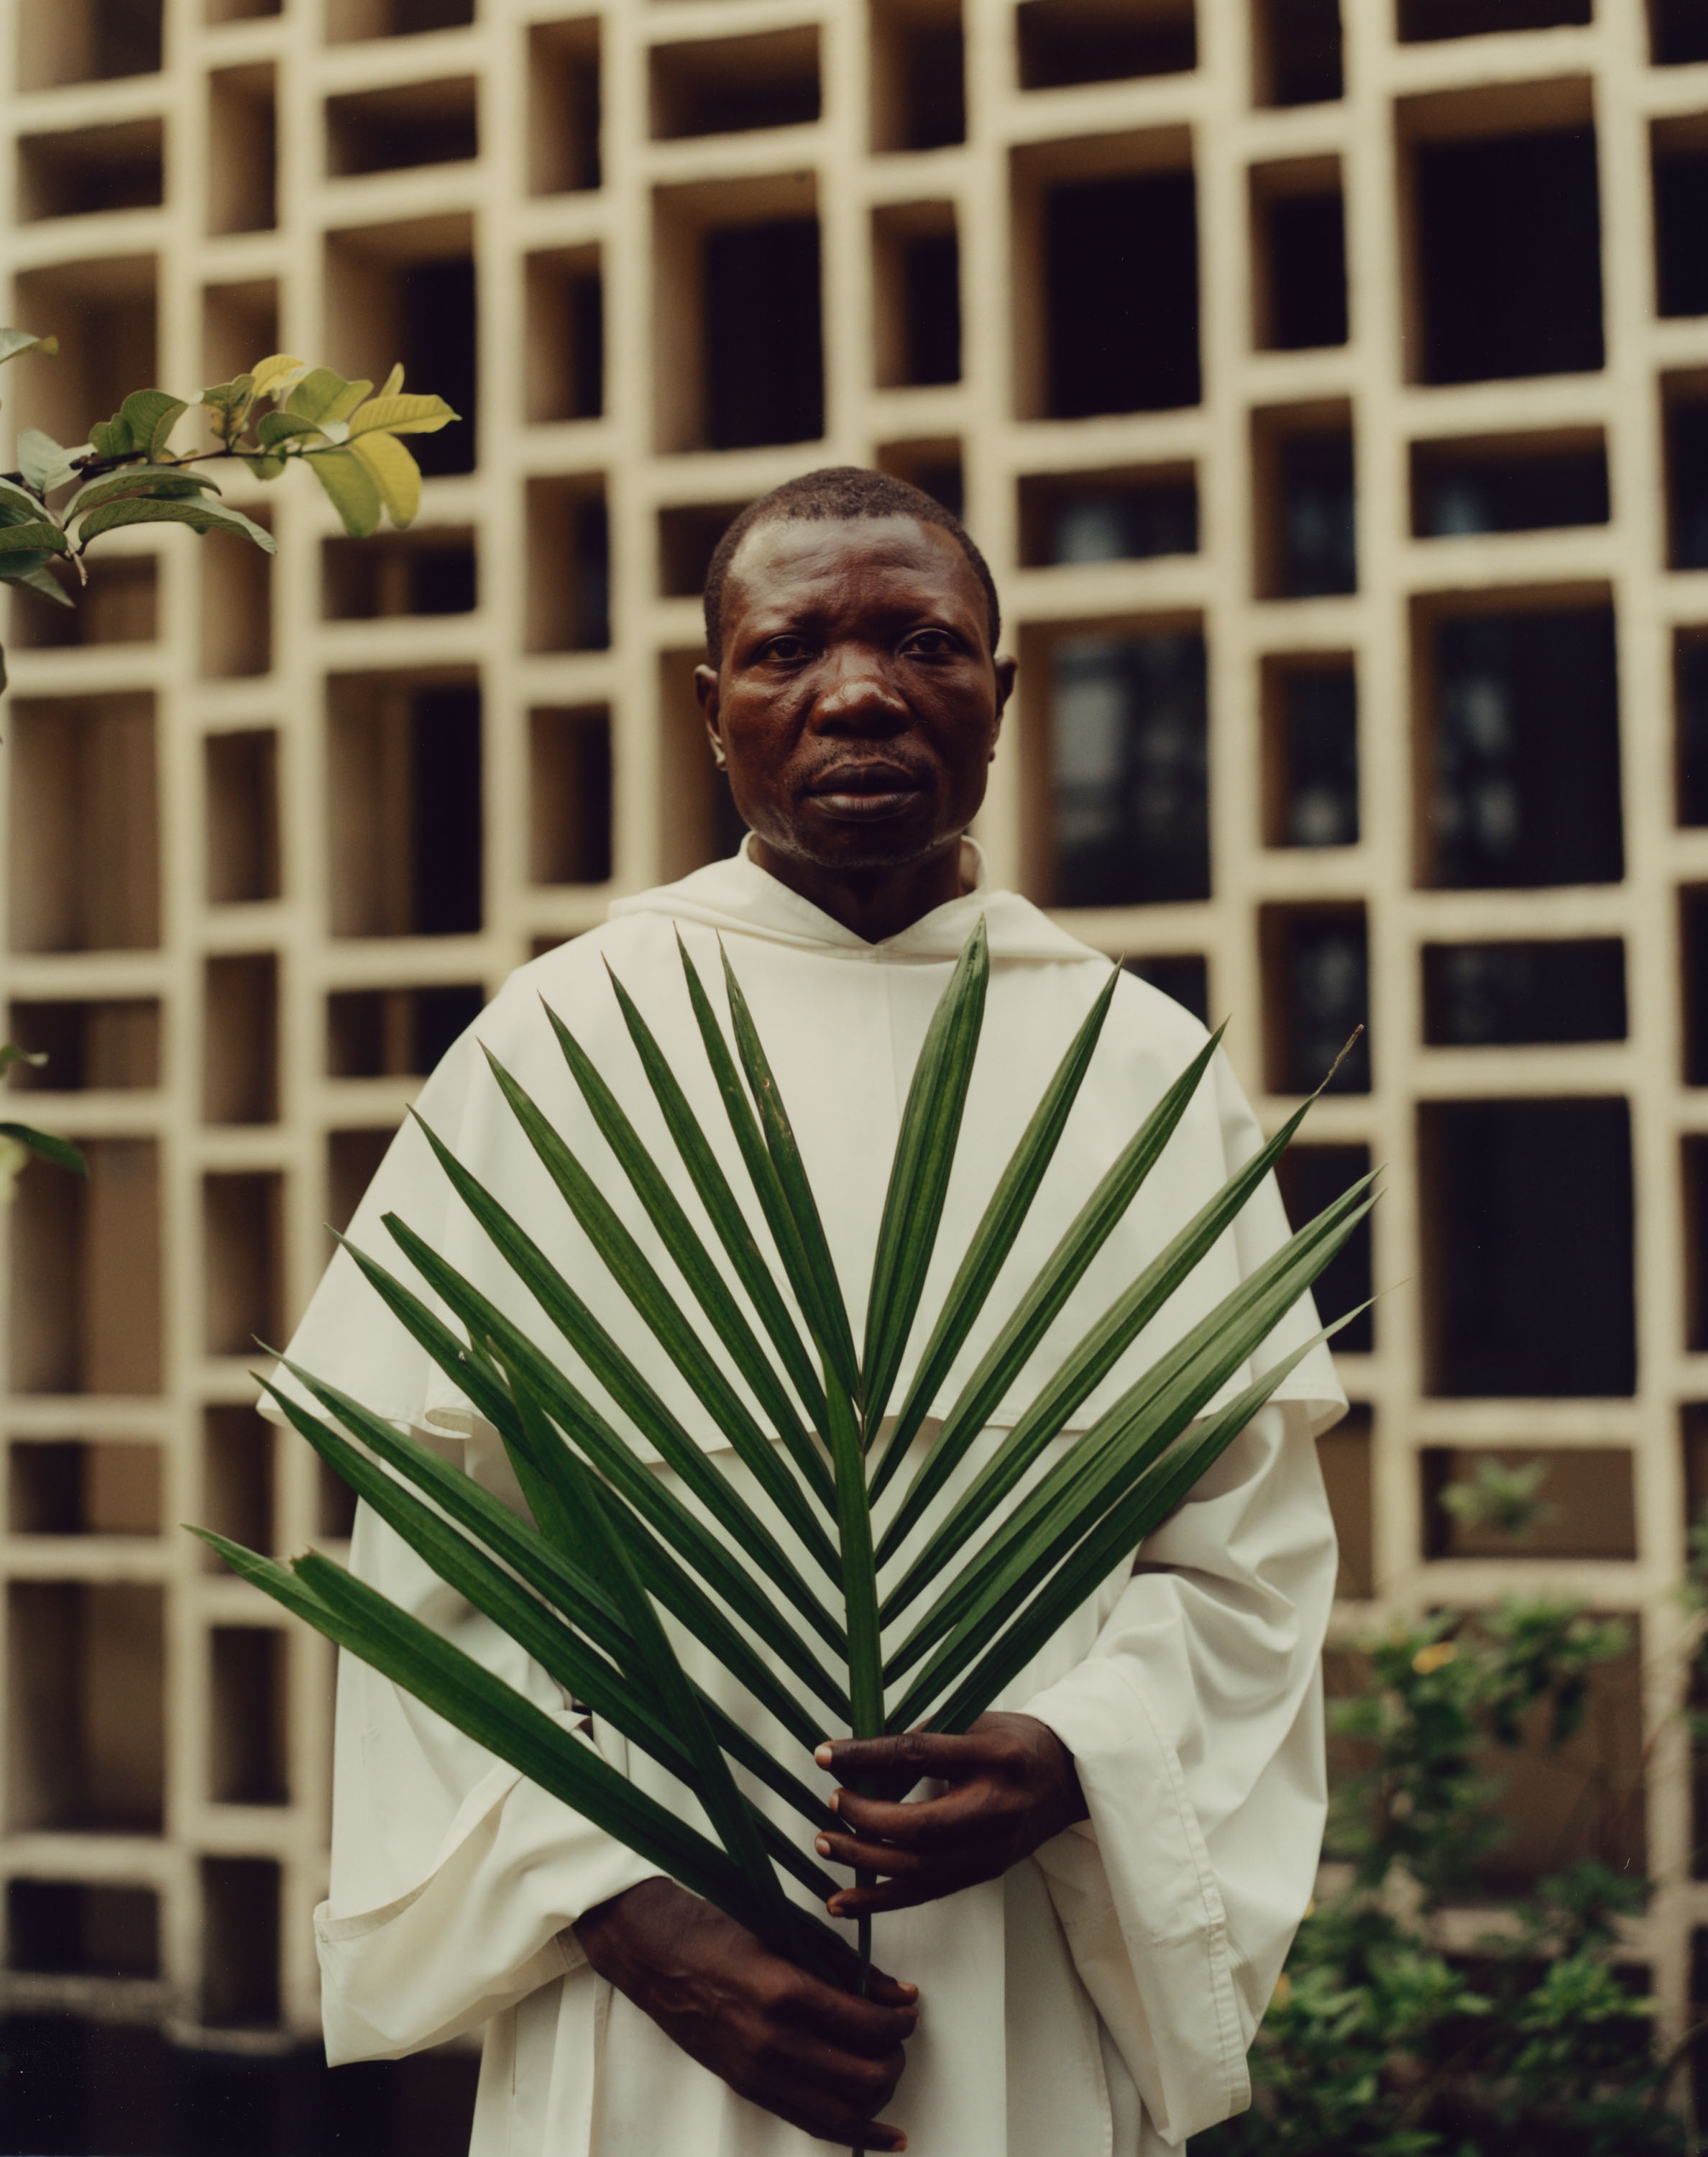  Alarmed at the dire condition of life for their congregations, the priests of Congo have attempted to broker elections with the brutal regime. Many look to them and the rituals of the Church for guidance and assurance as Congo approaches a tipping p